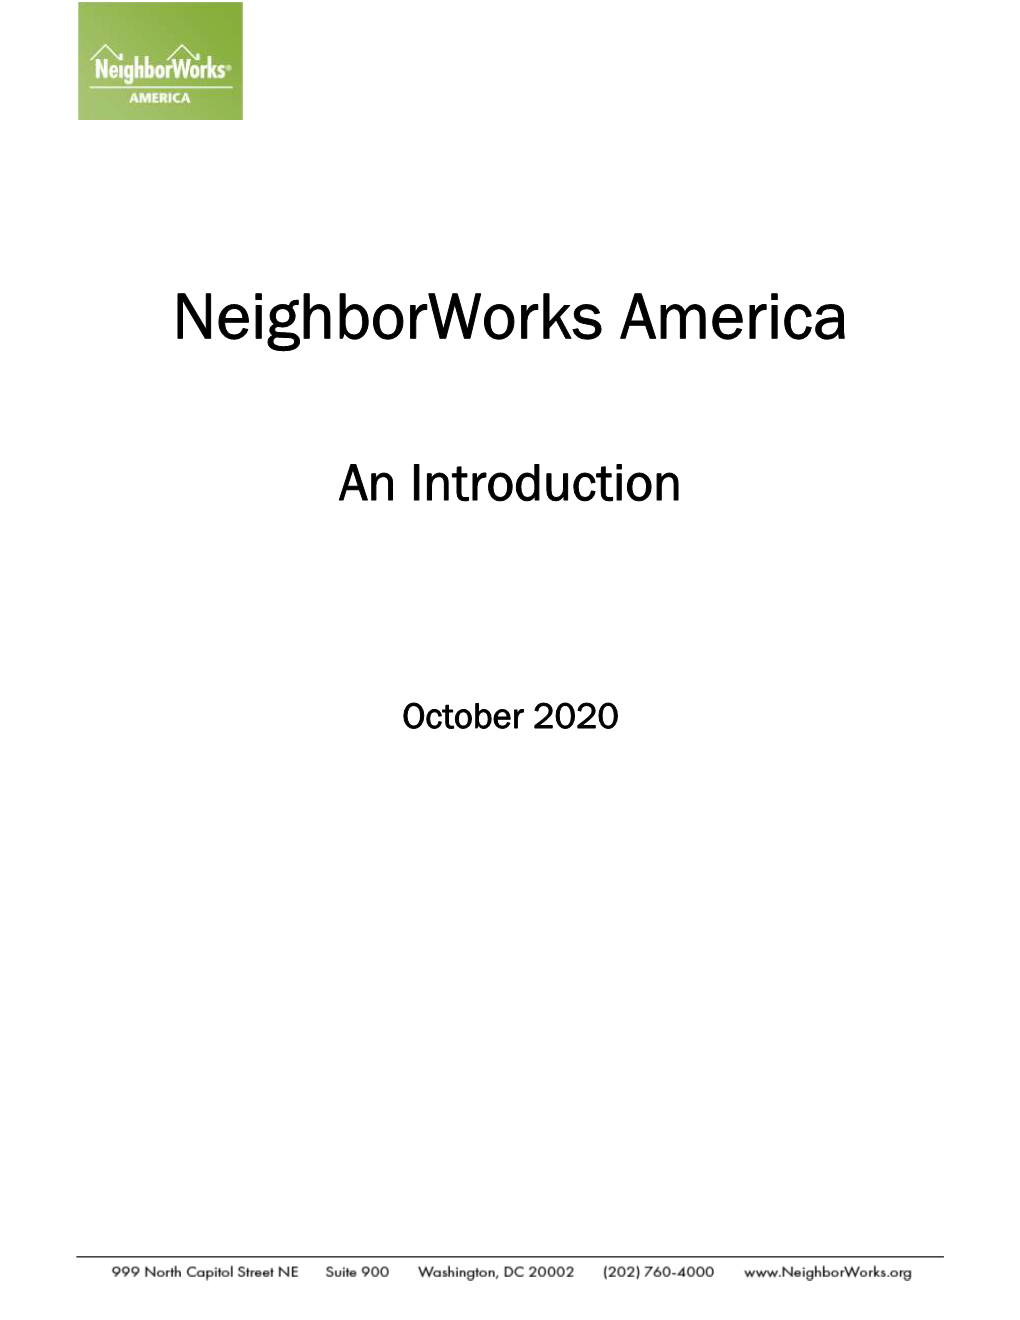 Read an Introduction to Neighborworks America and Learn